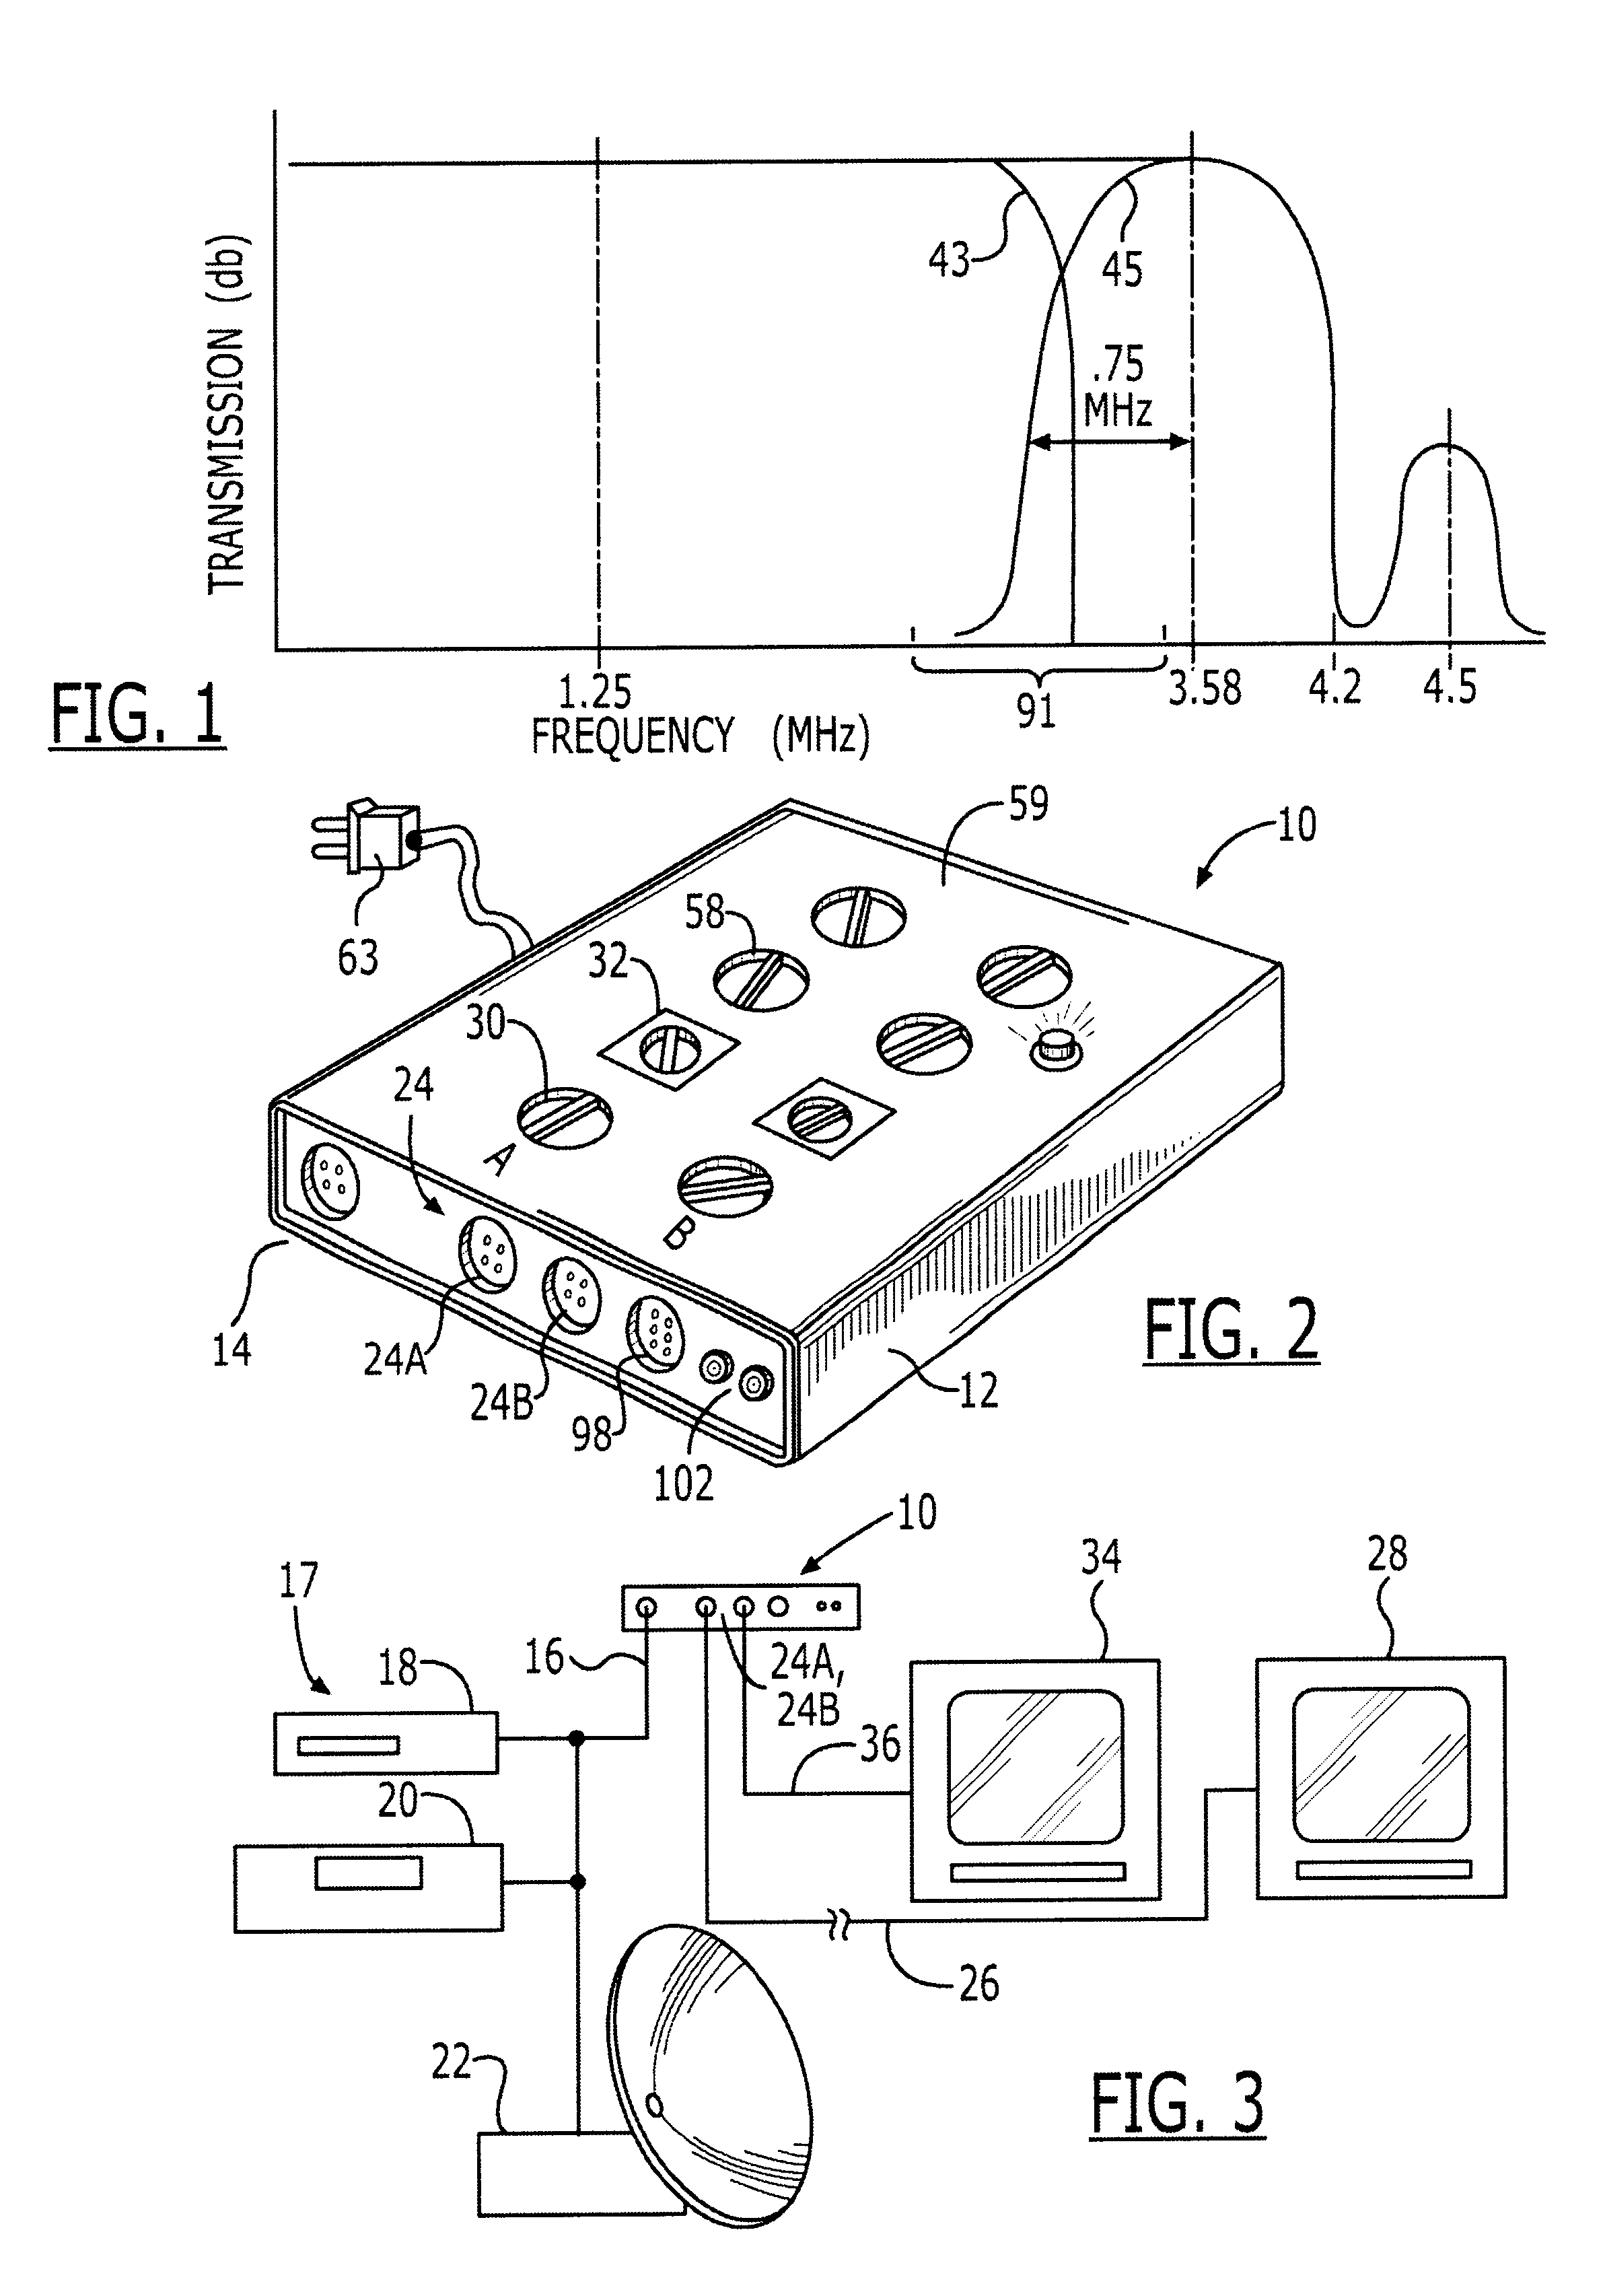 S-video signal loss compensation processing apparatus and method